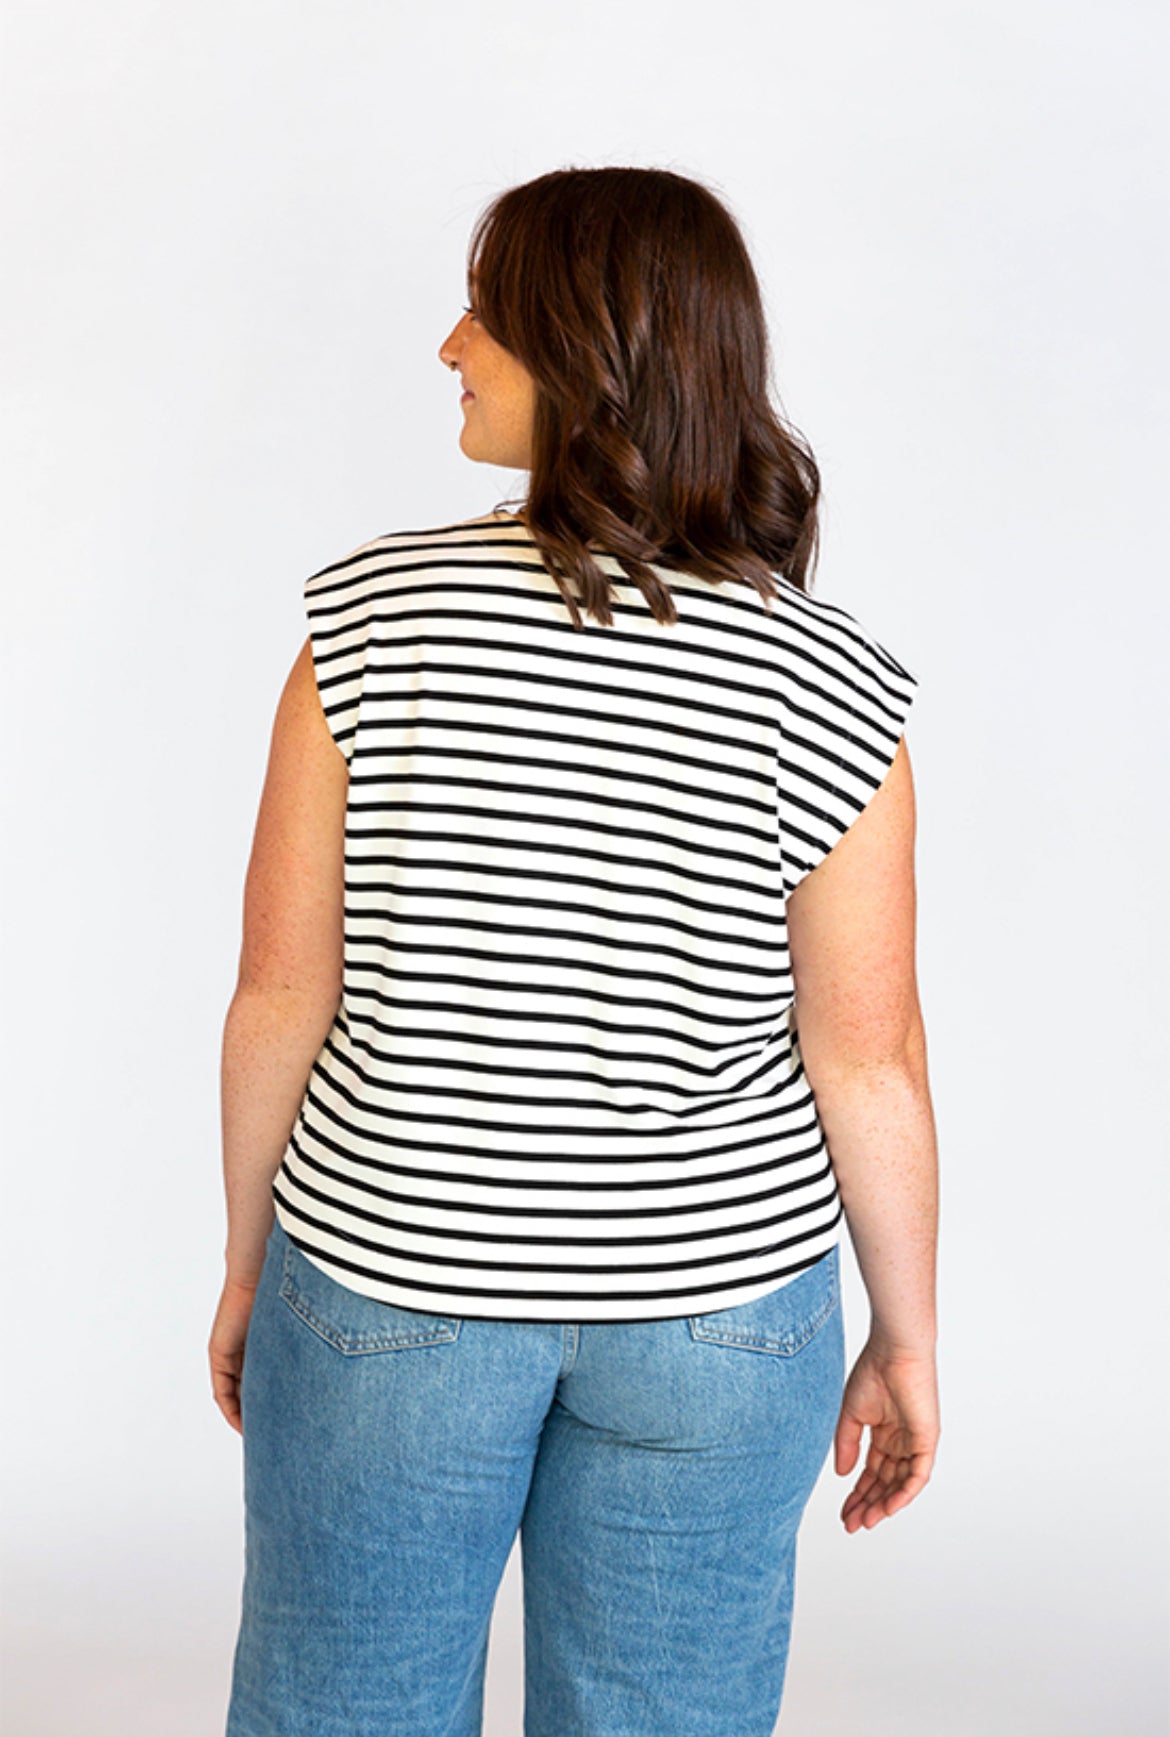 Chalk and Notch - Max Tee Top Sewing Pattern